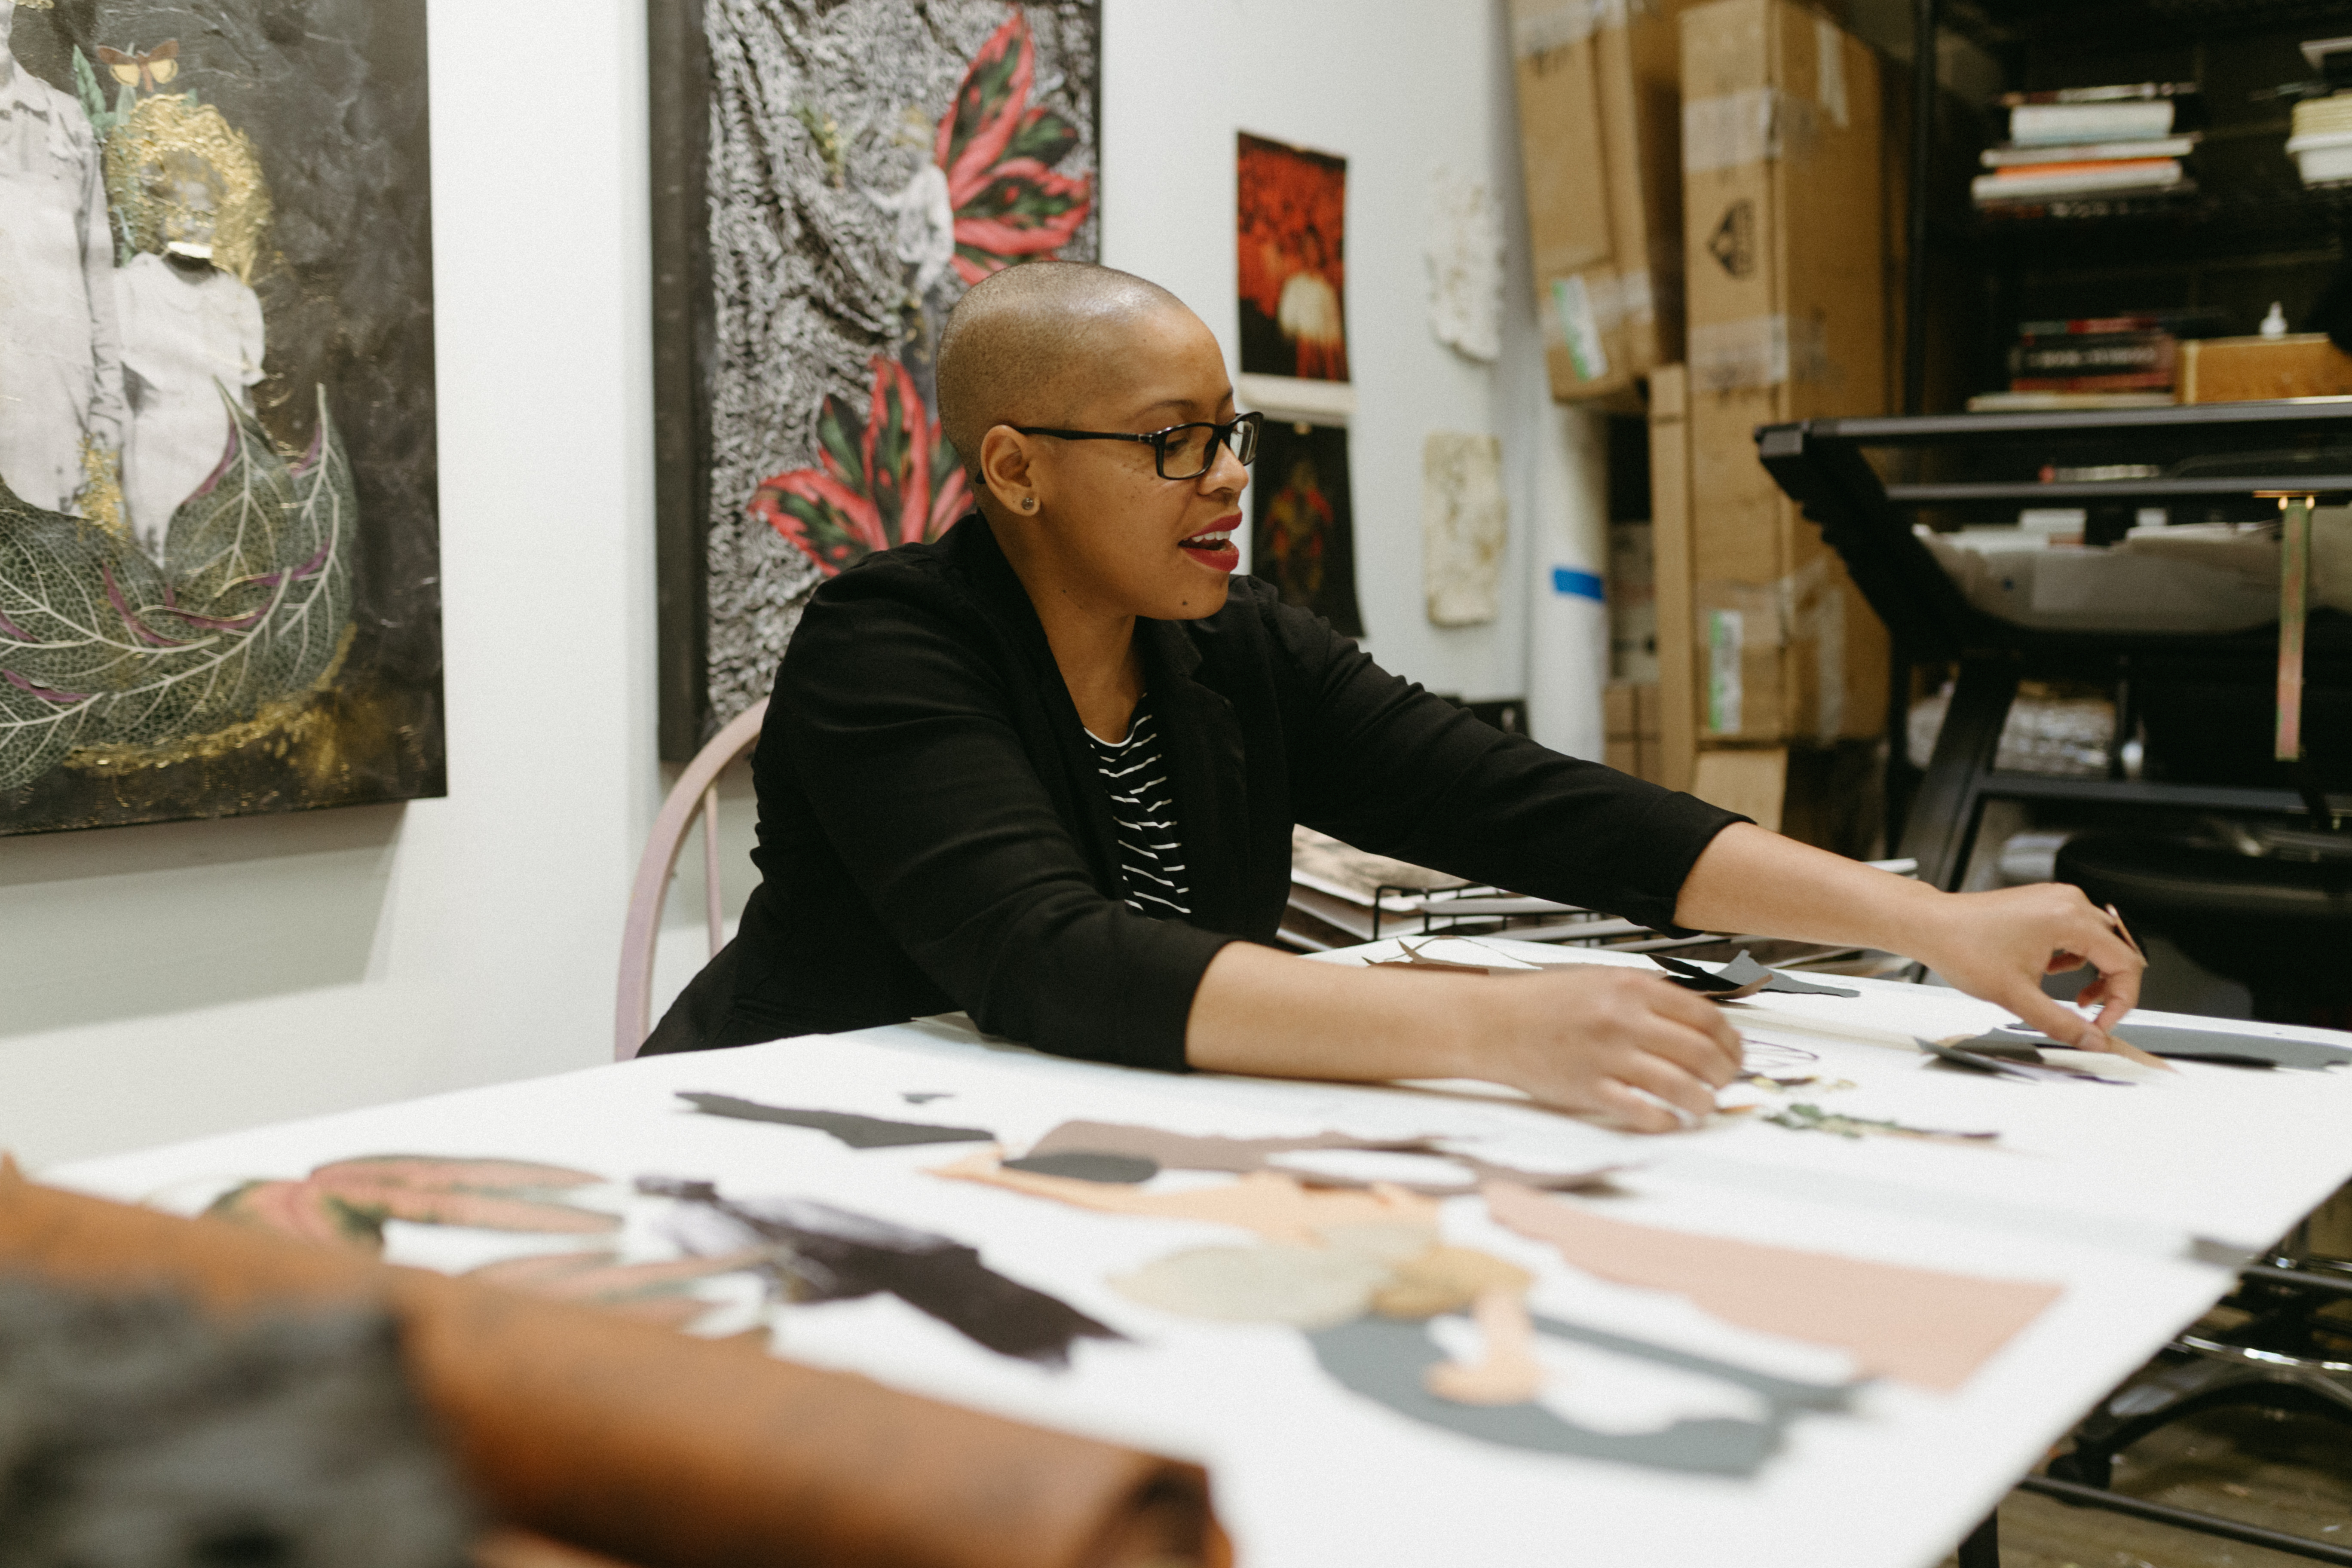 Anthony working on a collage in her studio. She is wearing a black blazer and is smiling. 